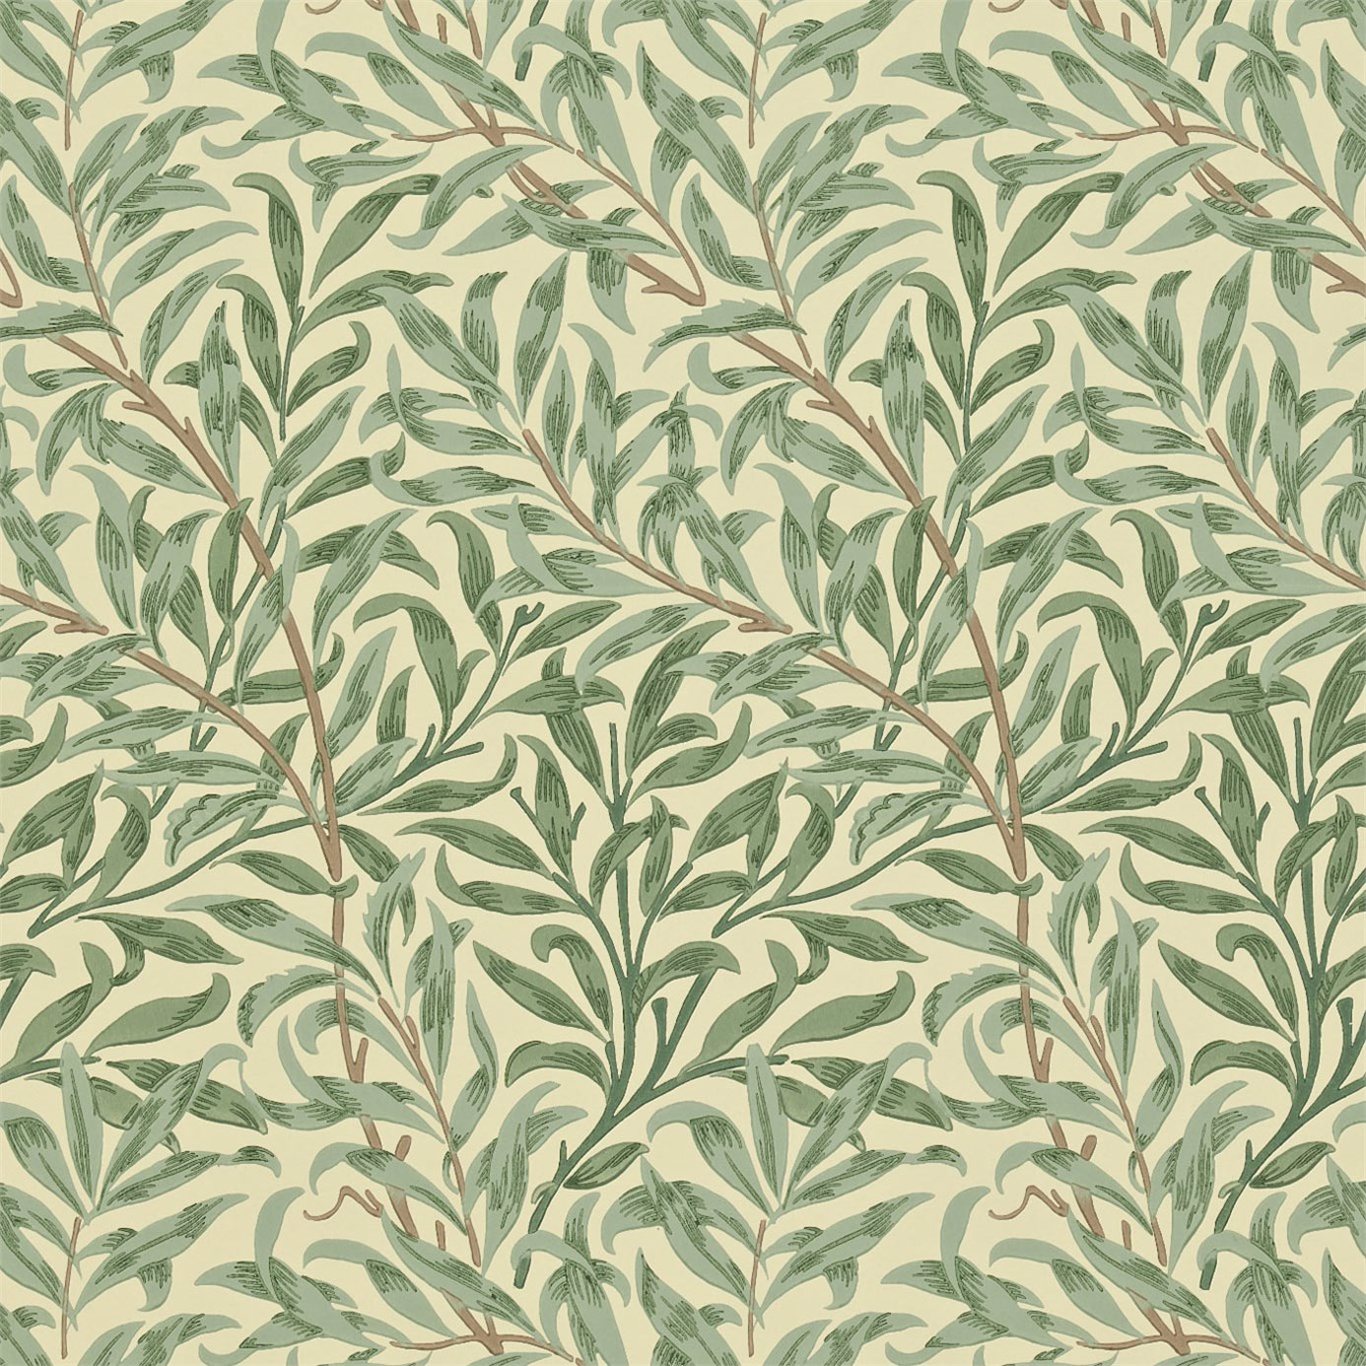 William Morris Willow Boughs Wallpaper DCMW216866 by Morris & Co